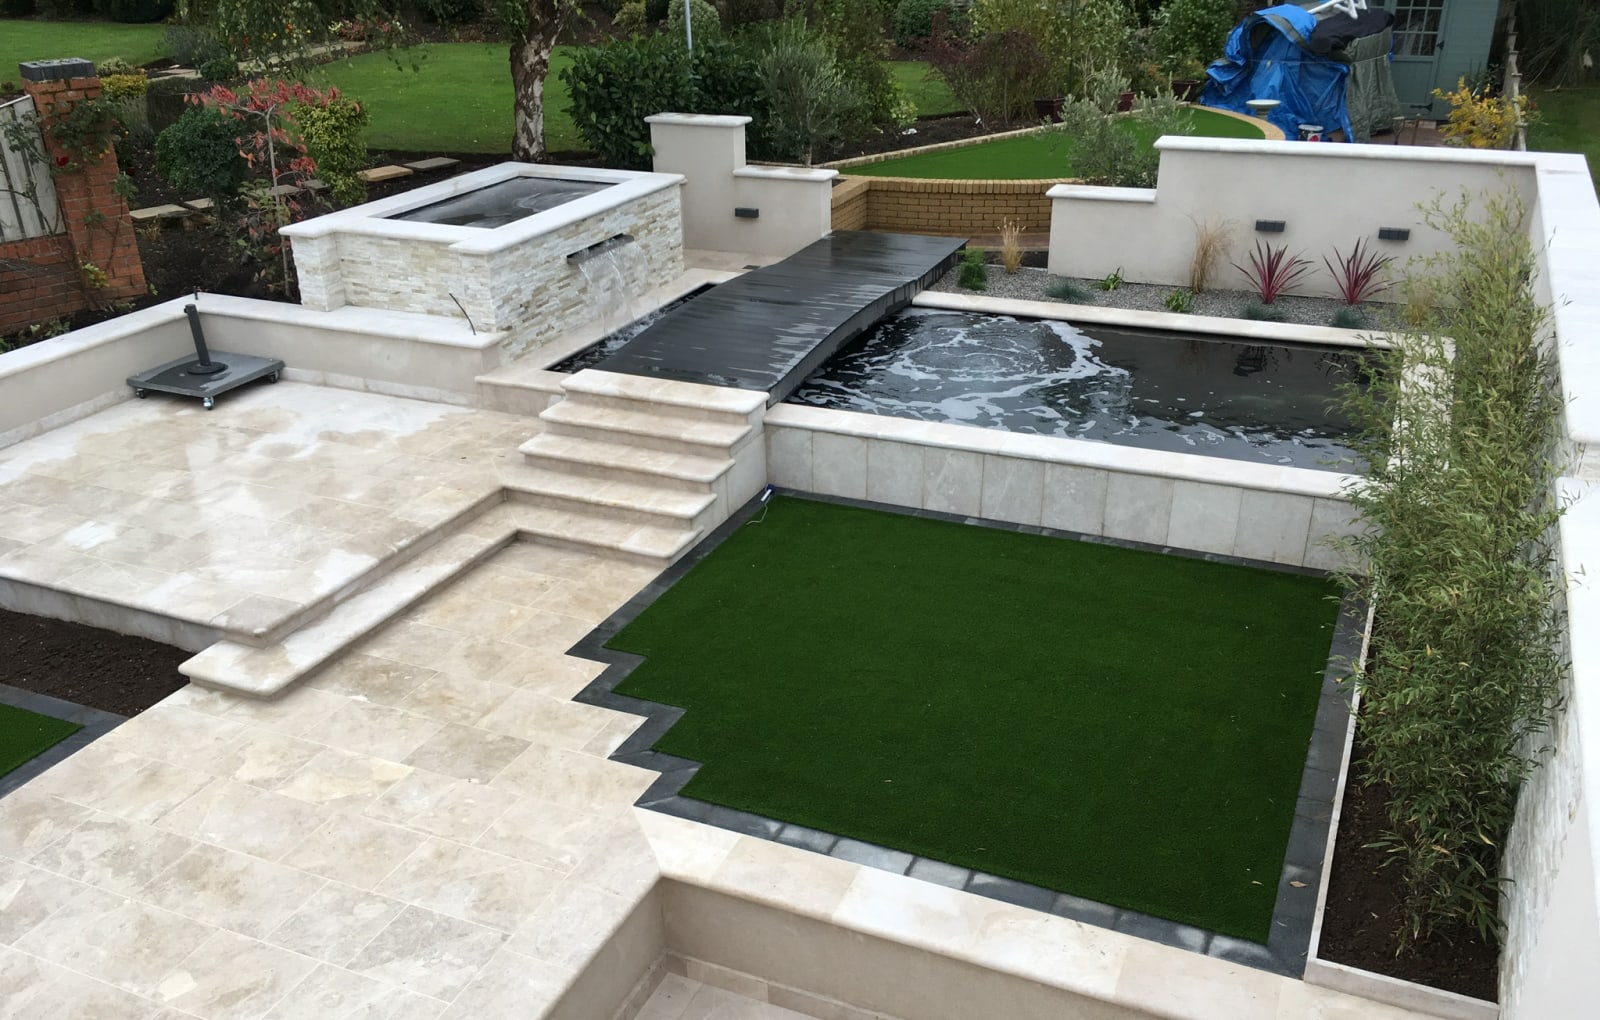 Multi-level patio with a koi pond